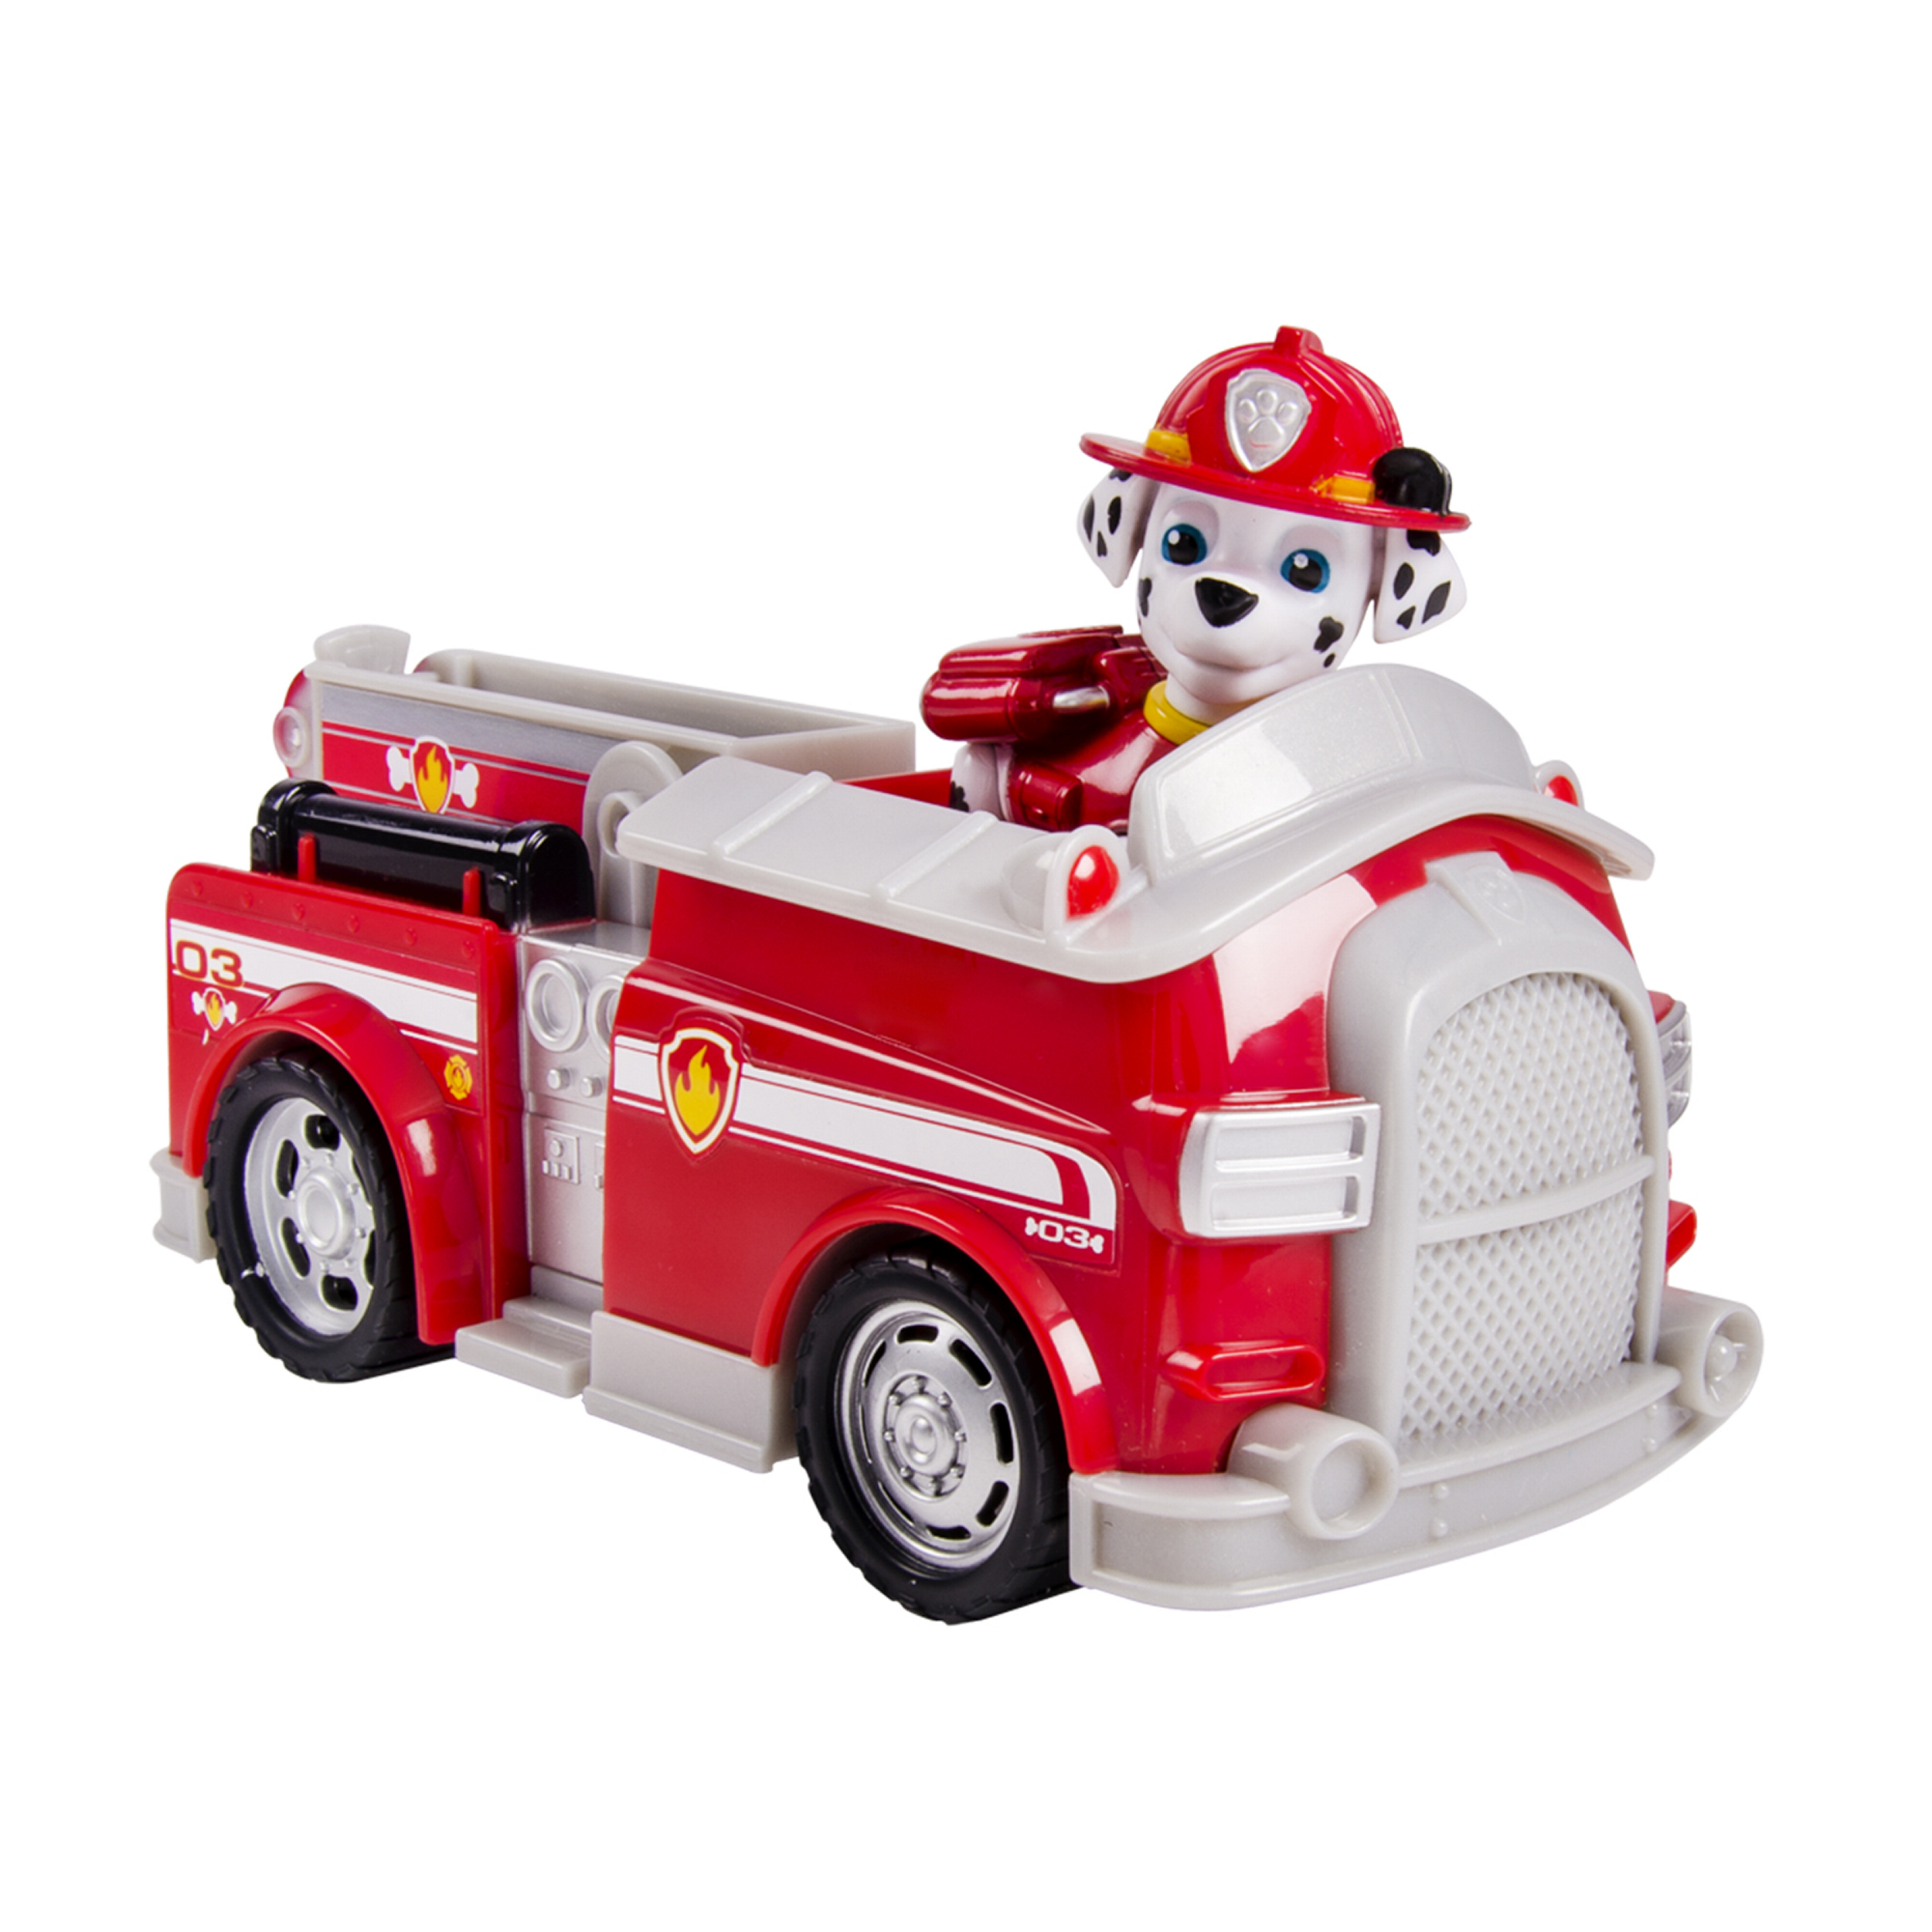 Paw Patrol Marshall's Fire Fightin' Truck, Vehicle and Figure - image 2 of 6